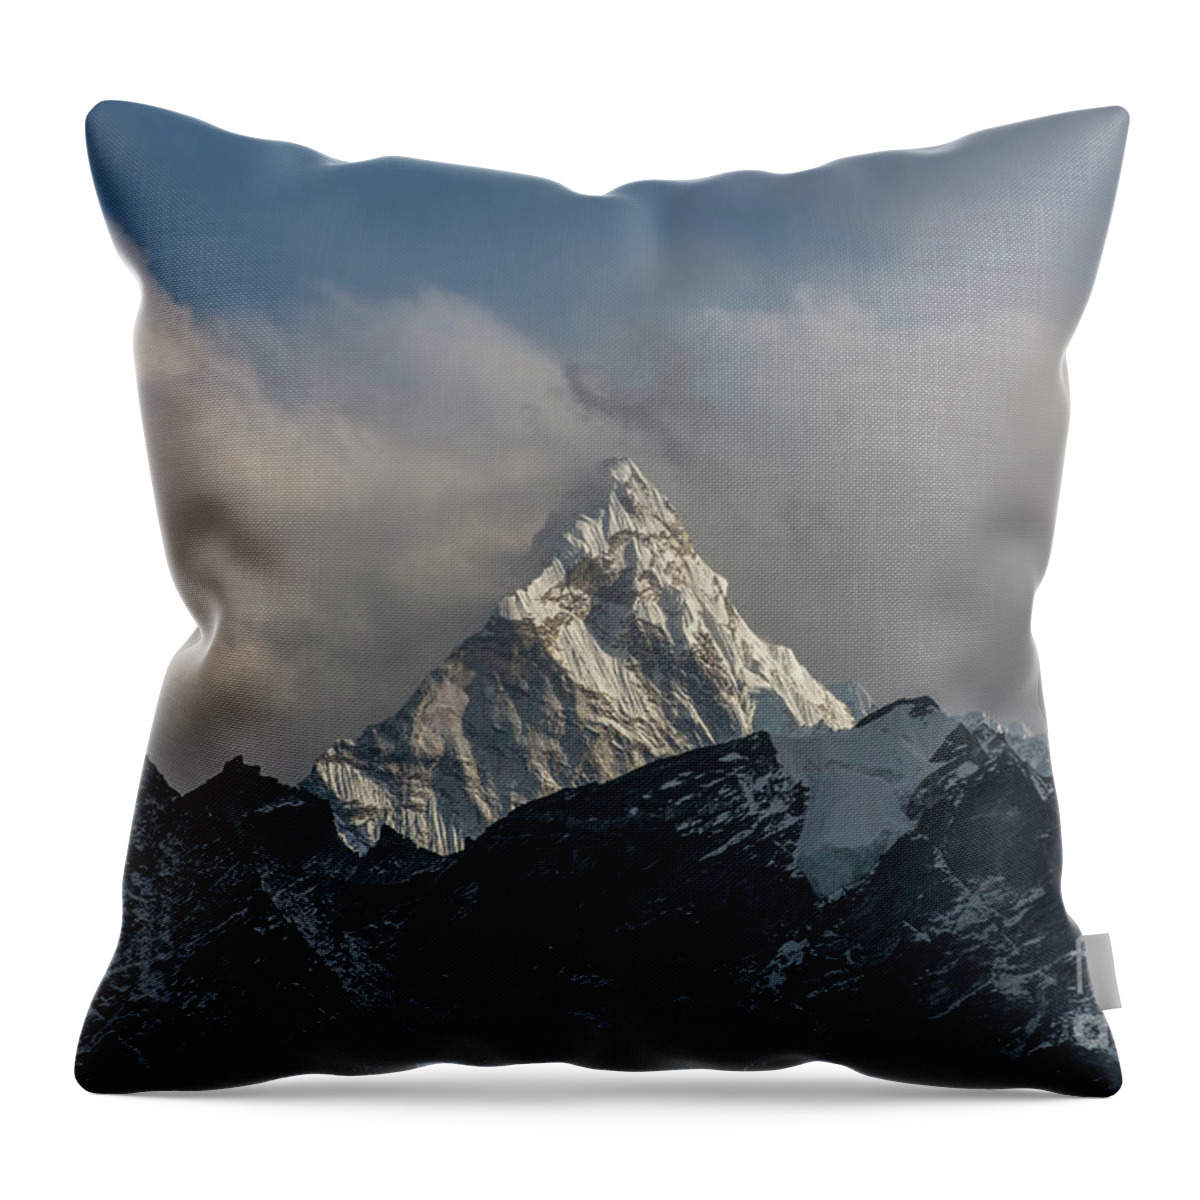 Everest Base Camp Trek Throw Pillow featuring the photograph Ama Dablam From Kalla Patthar by Mike Reid